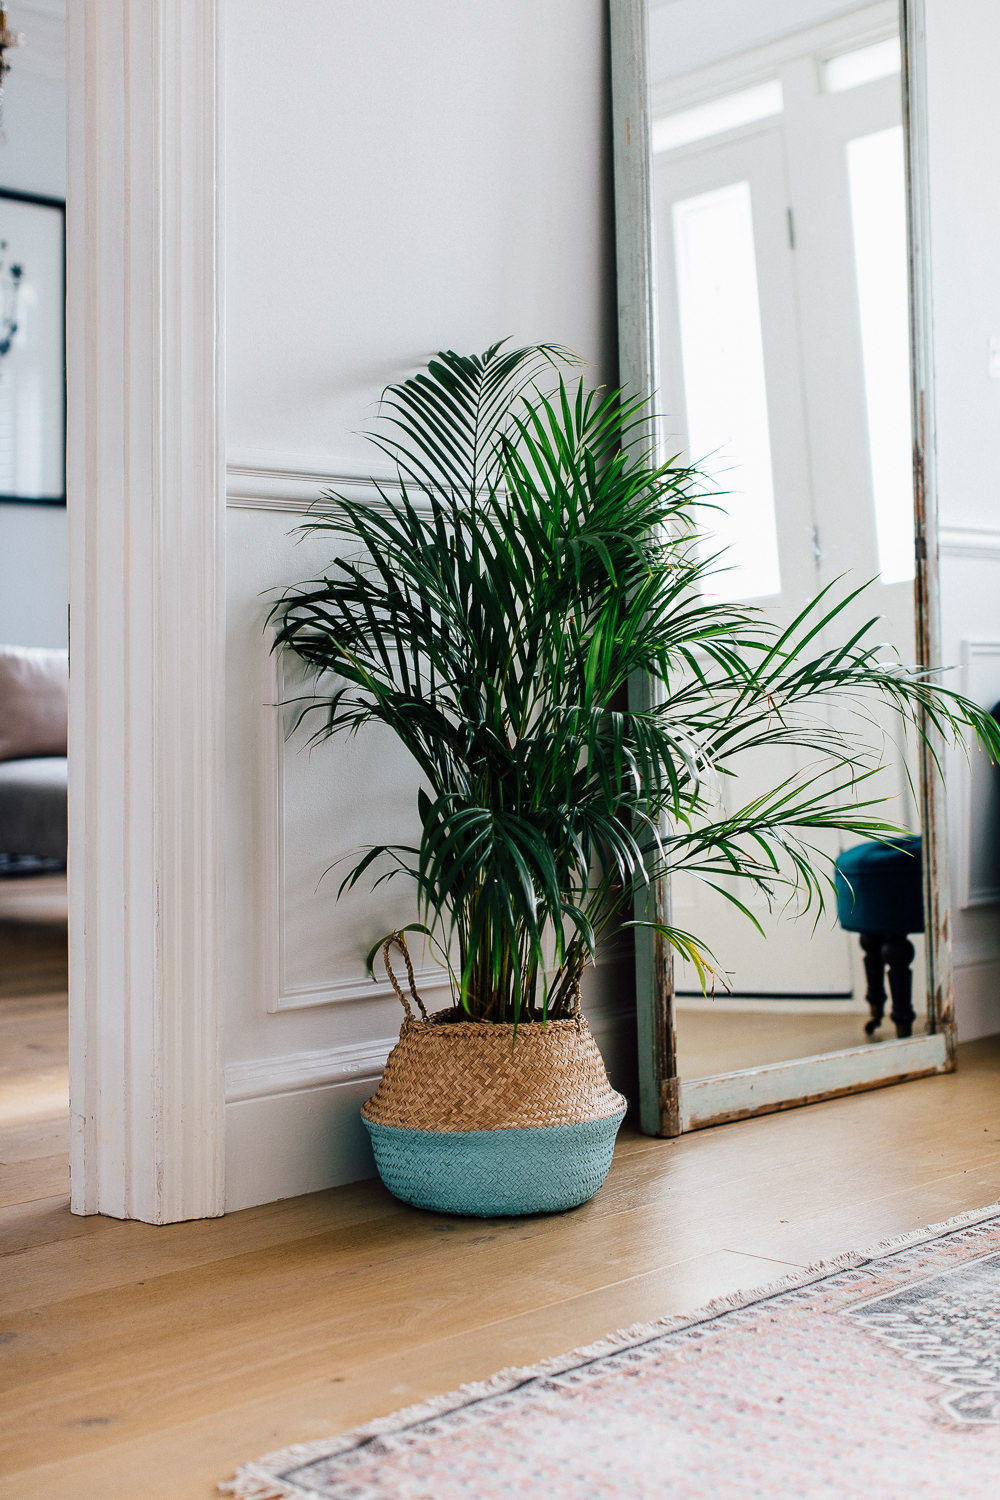 Palm in an entryway